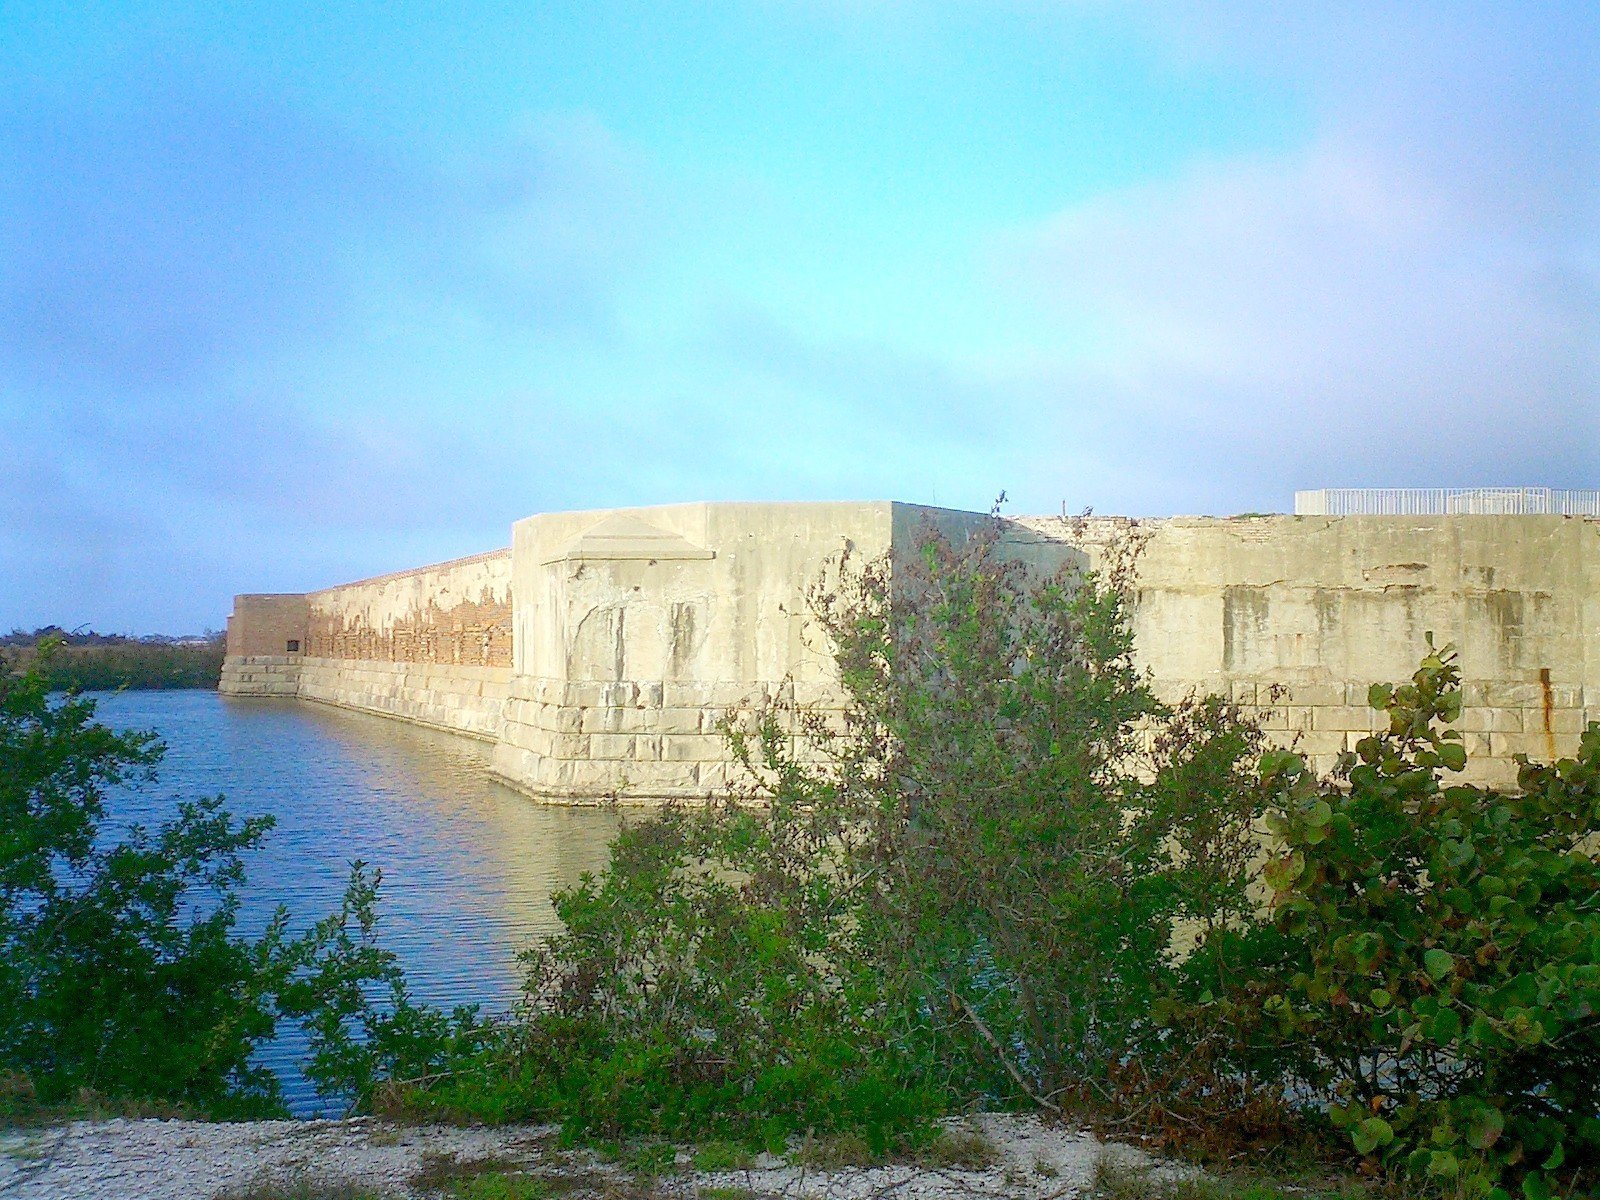 Fort Zachary Taylor in Key West I Image: Wikimedia Commons